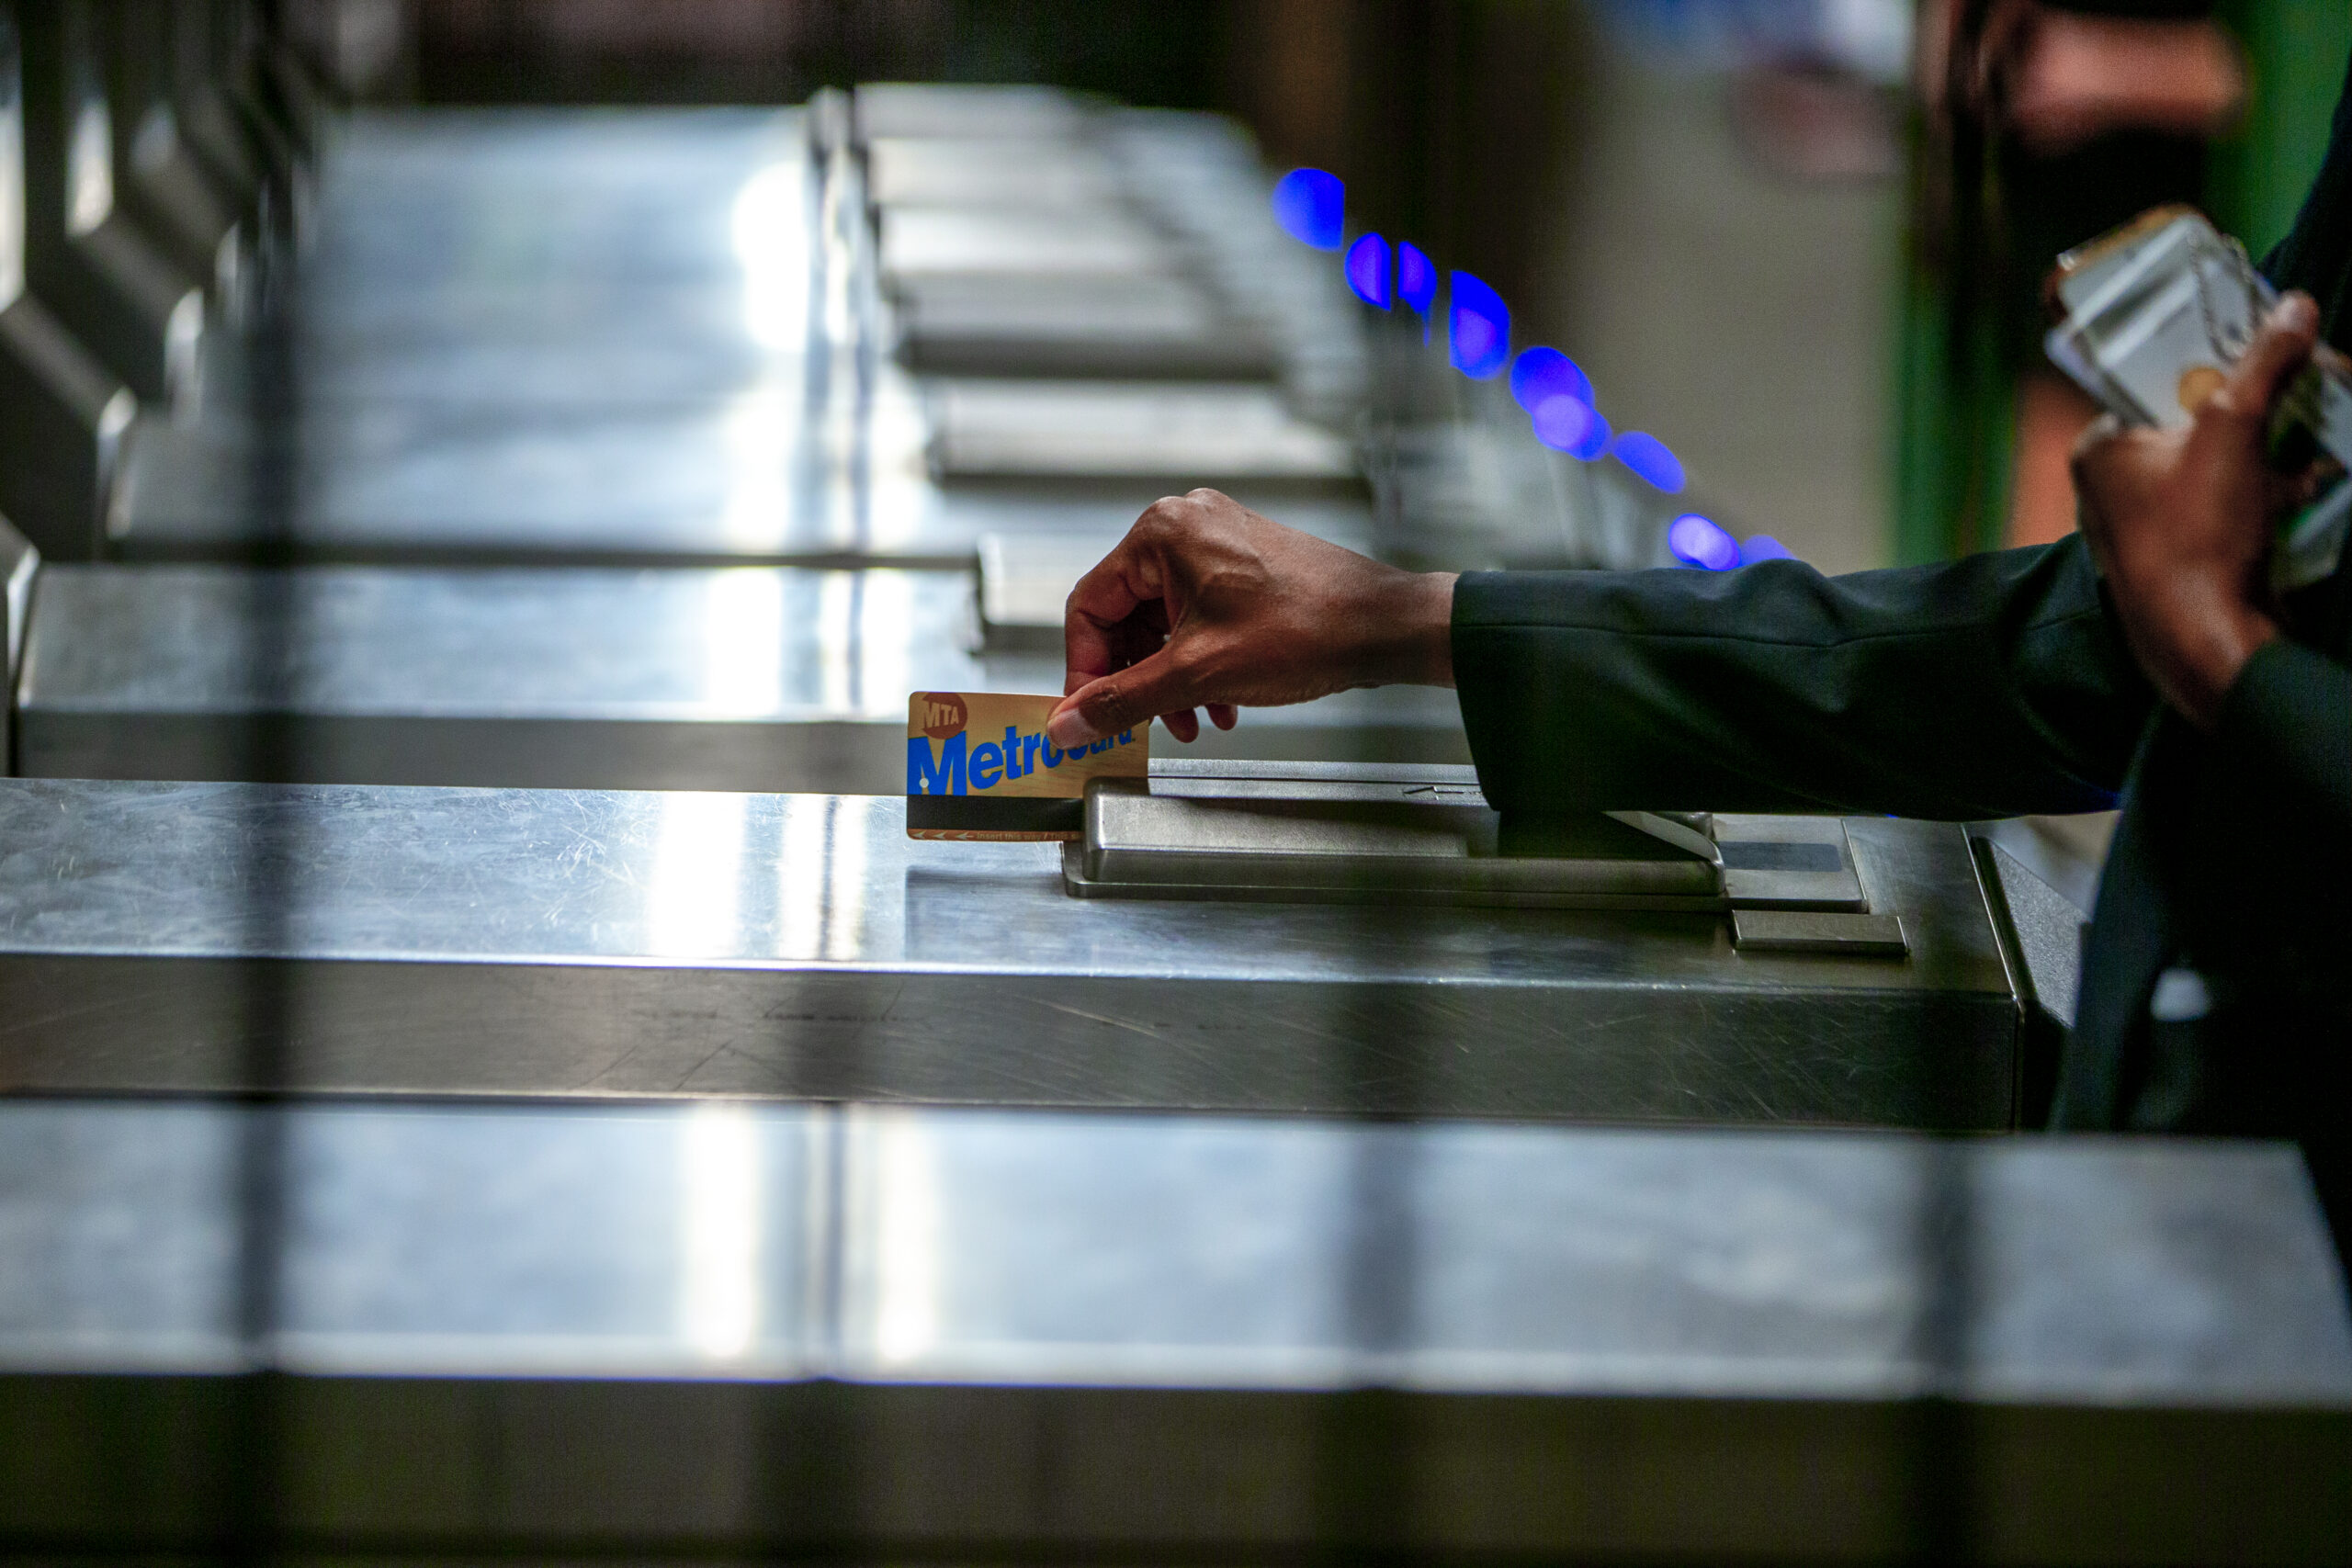 Close-up of an individual swiping their Metrocard at a turnstile.